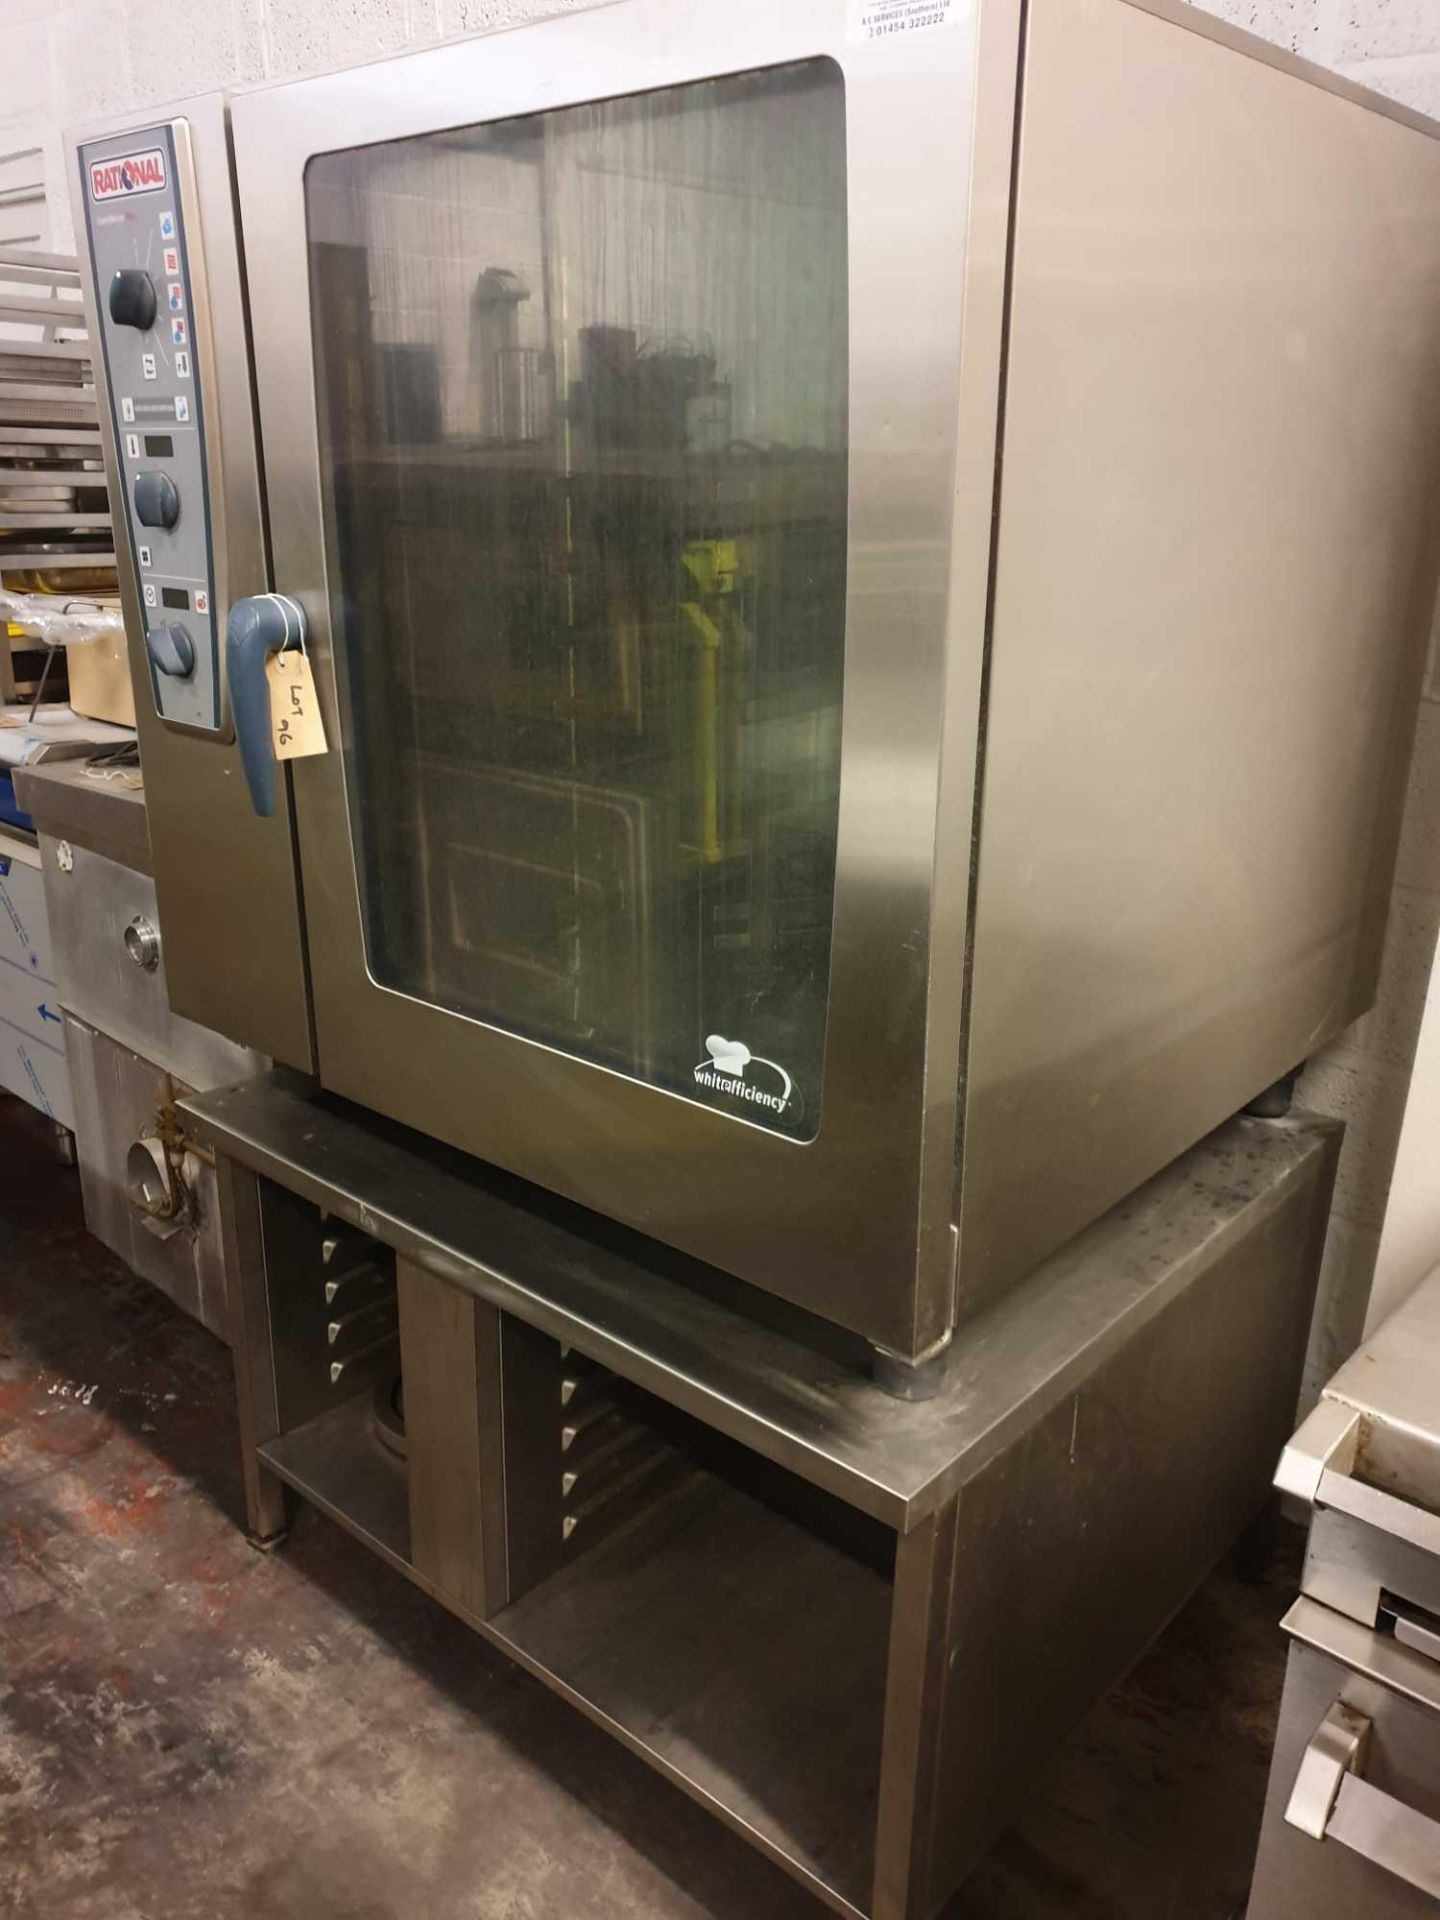 Rationalcm P102E 10 Grid 2/1GN Electric CombiMaster Plus Combination Oven complete with stainless